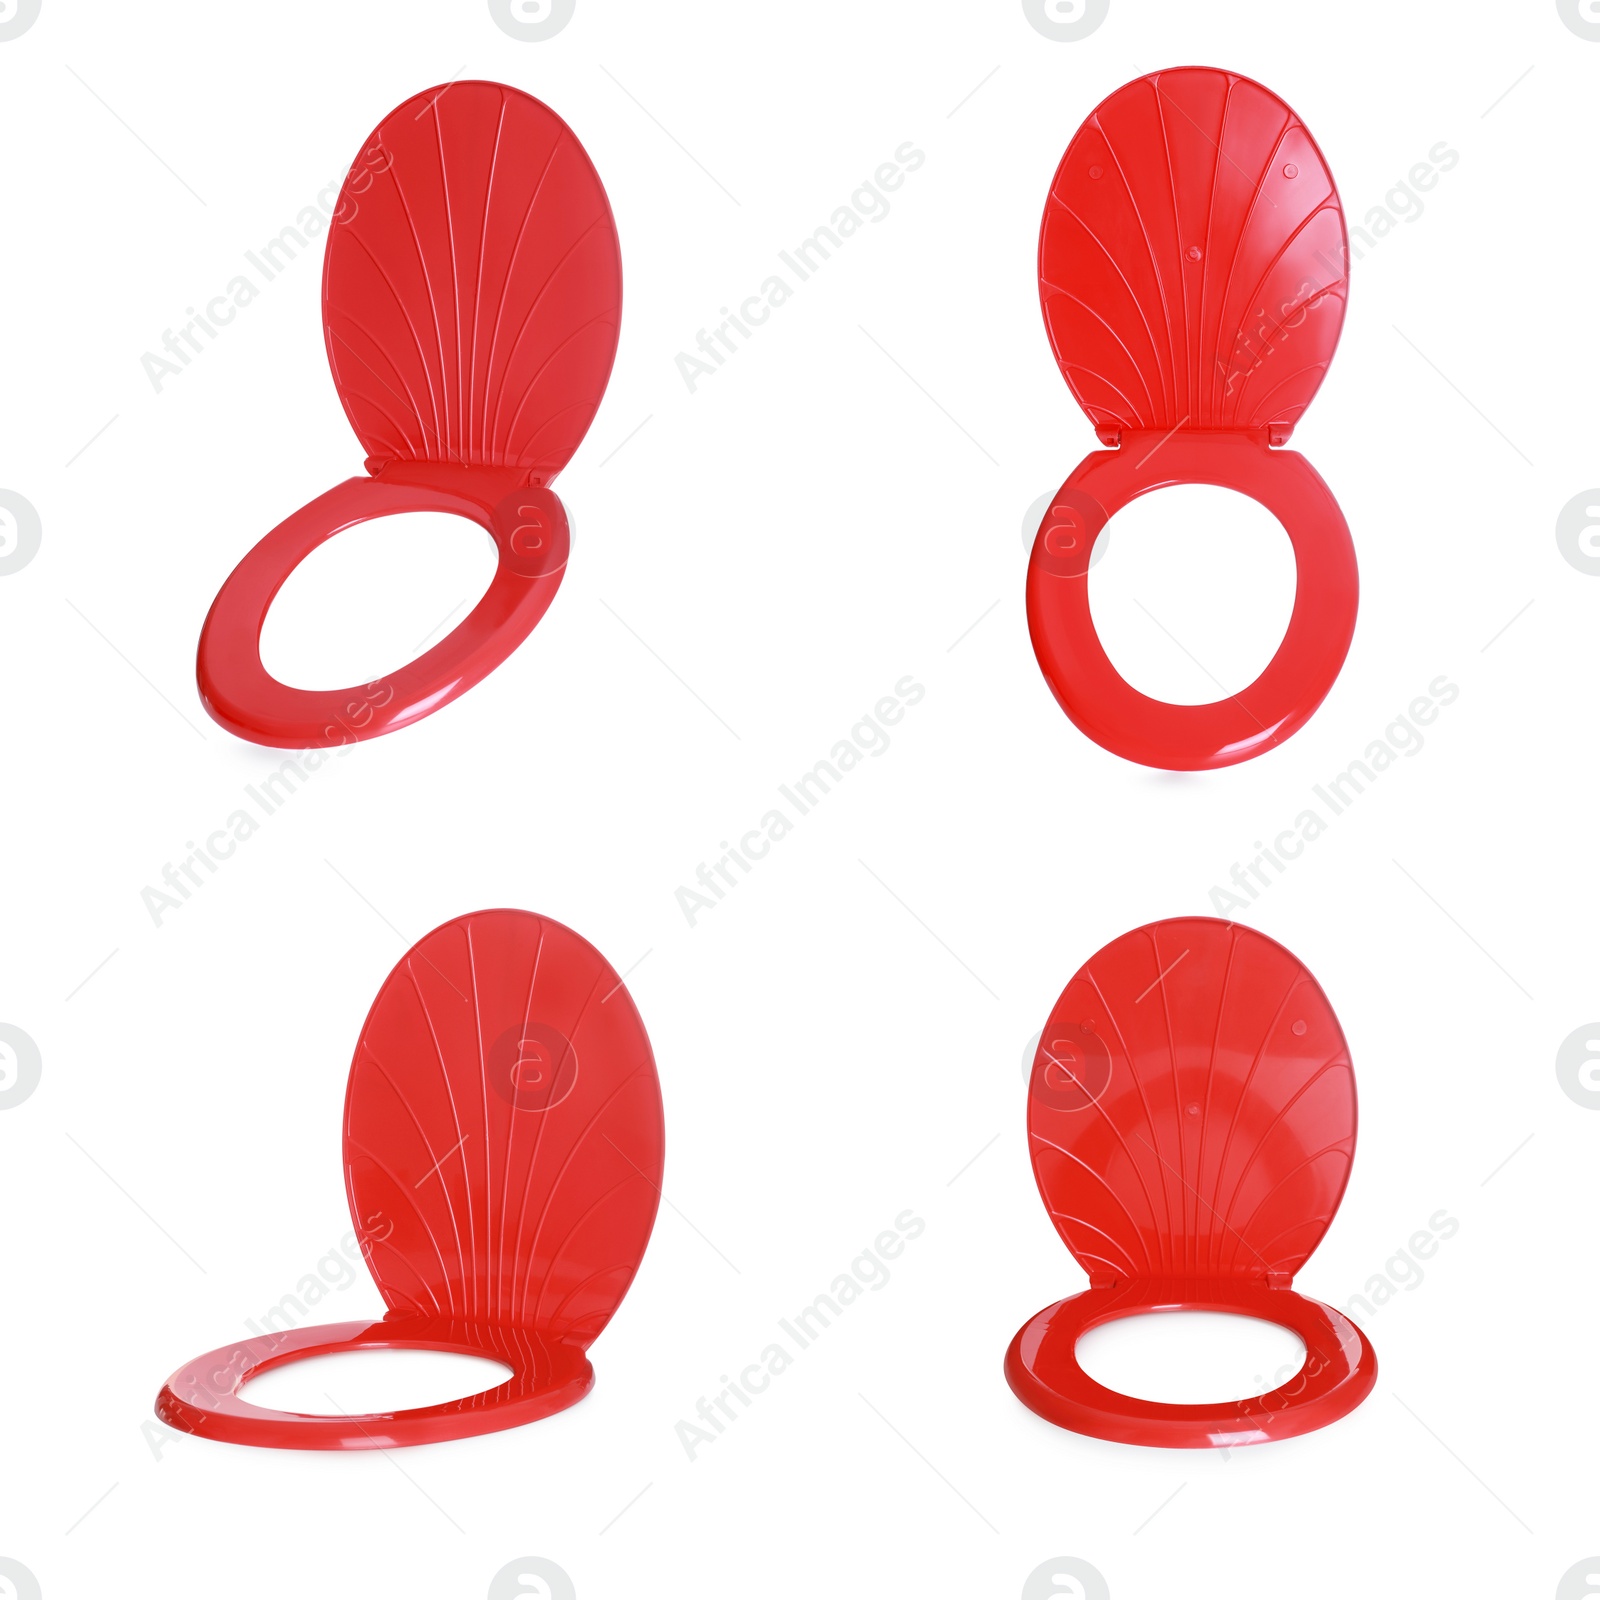 Image of Set with red plastic toilet seats on white background